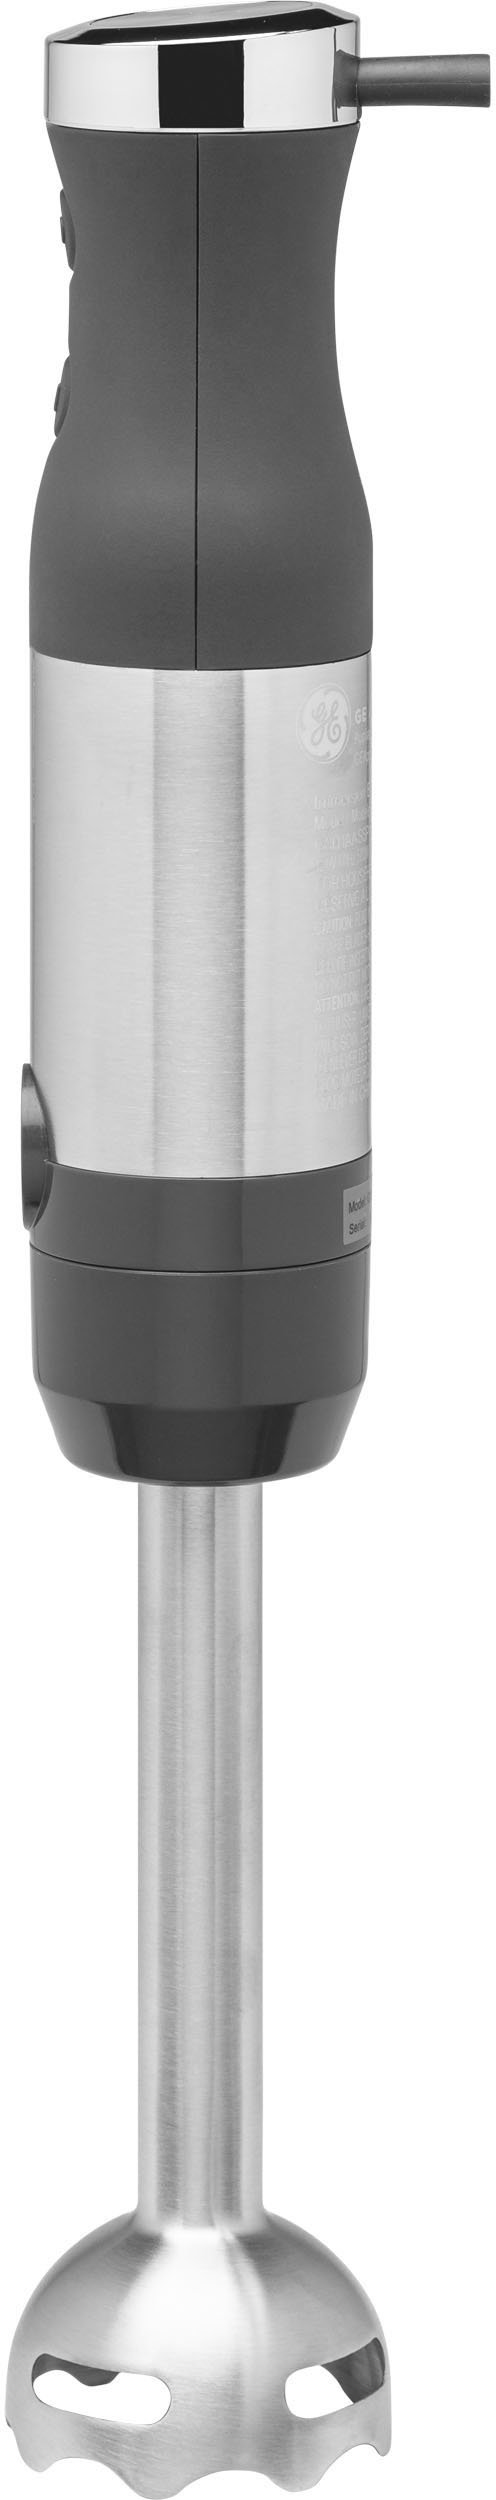 Angle View: GE - Immersion 2-Speed Handheld Blender - Stainless Steel